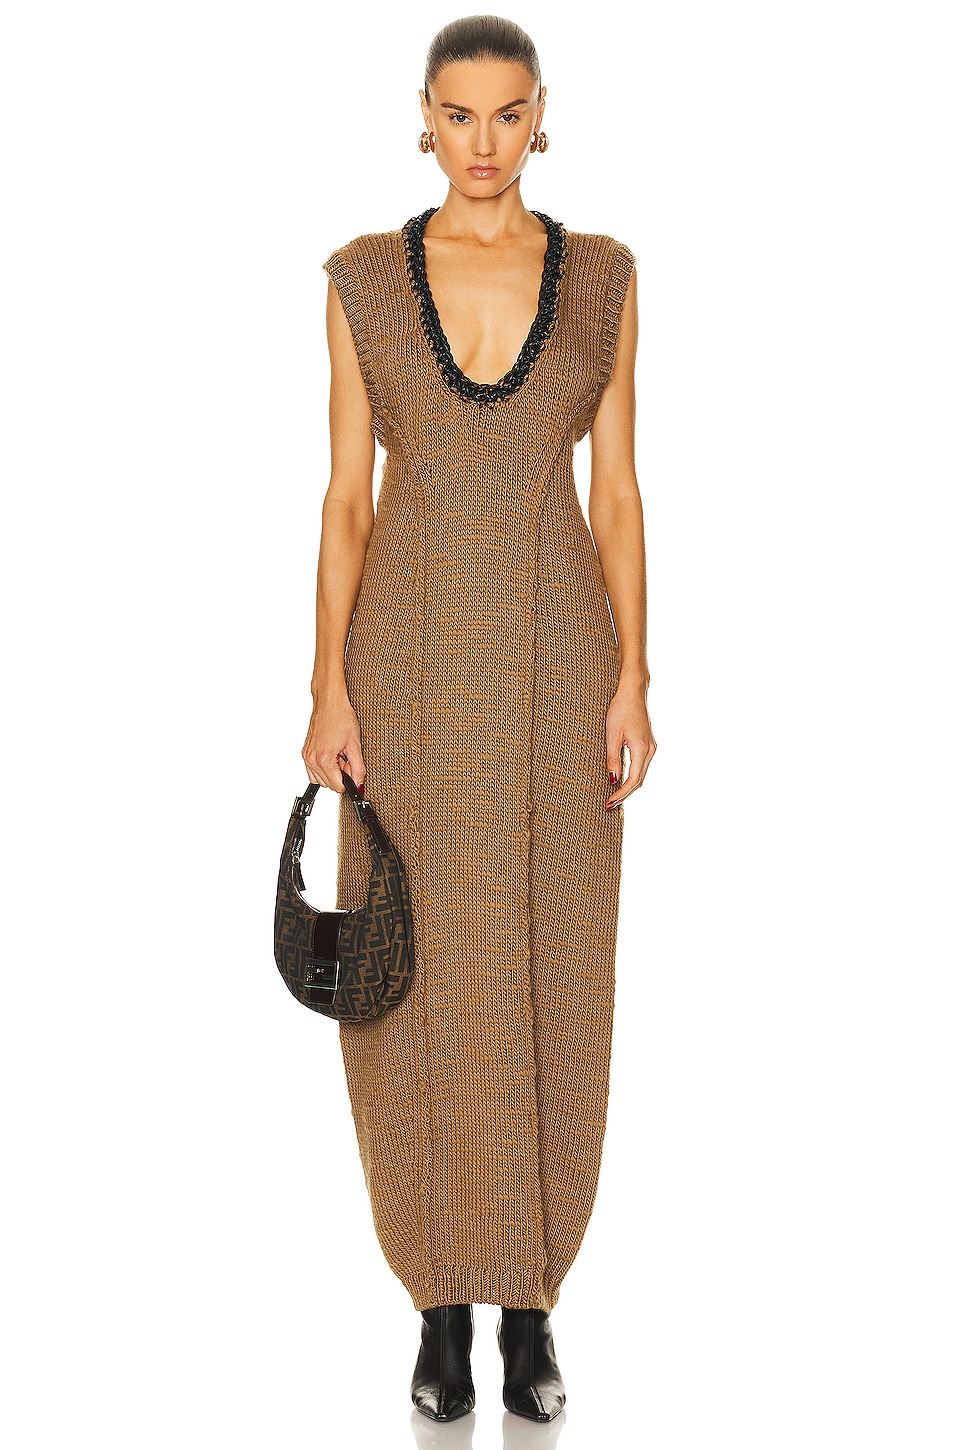 Image 1 of Aisling Camps Leather Crochet Cocoon Dress in Hazelnut/black